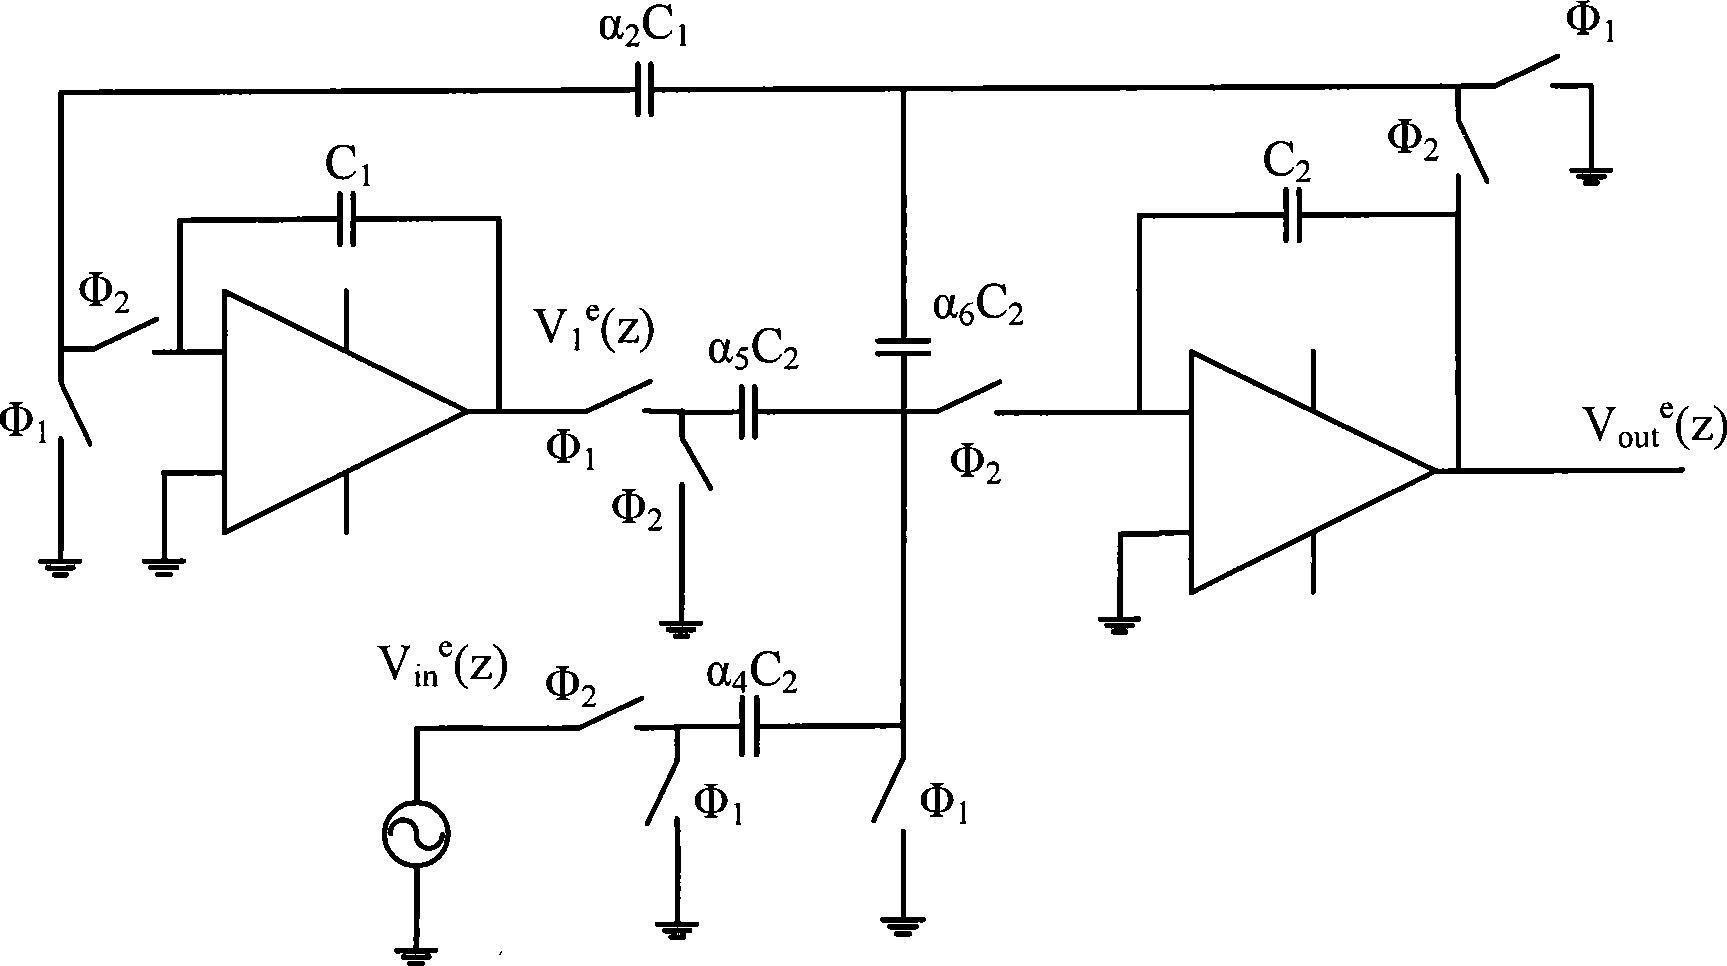 Switch capacitor band-pass filter and continuous time band-pass filter